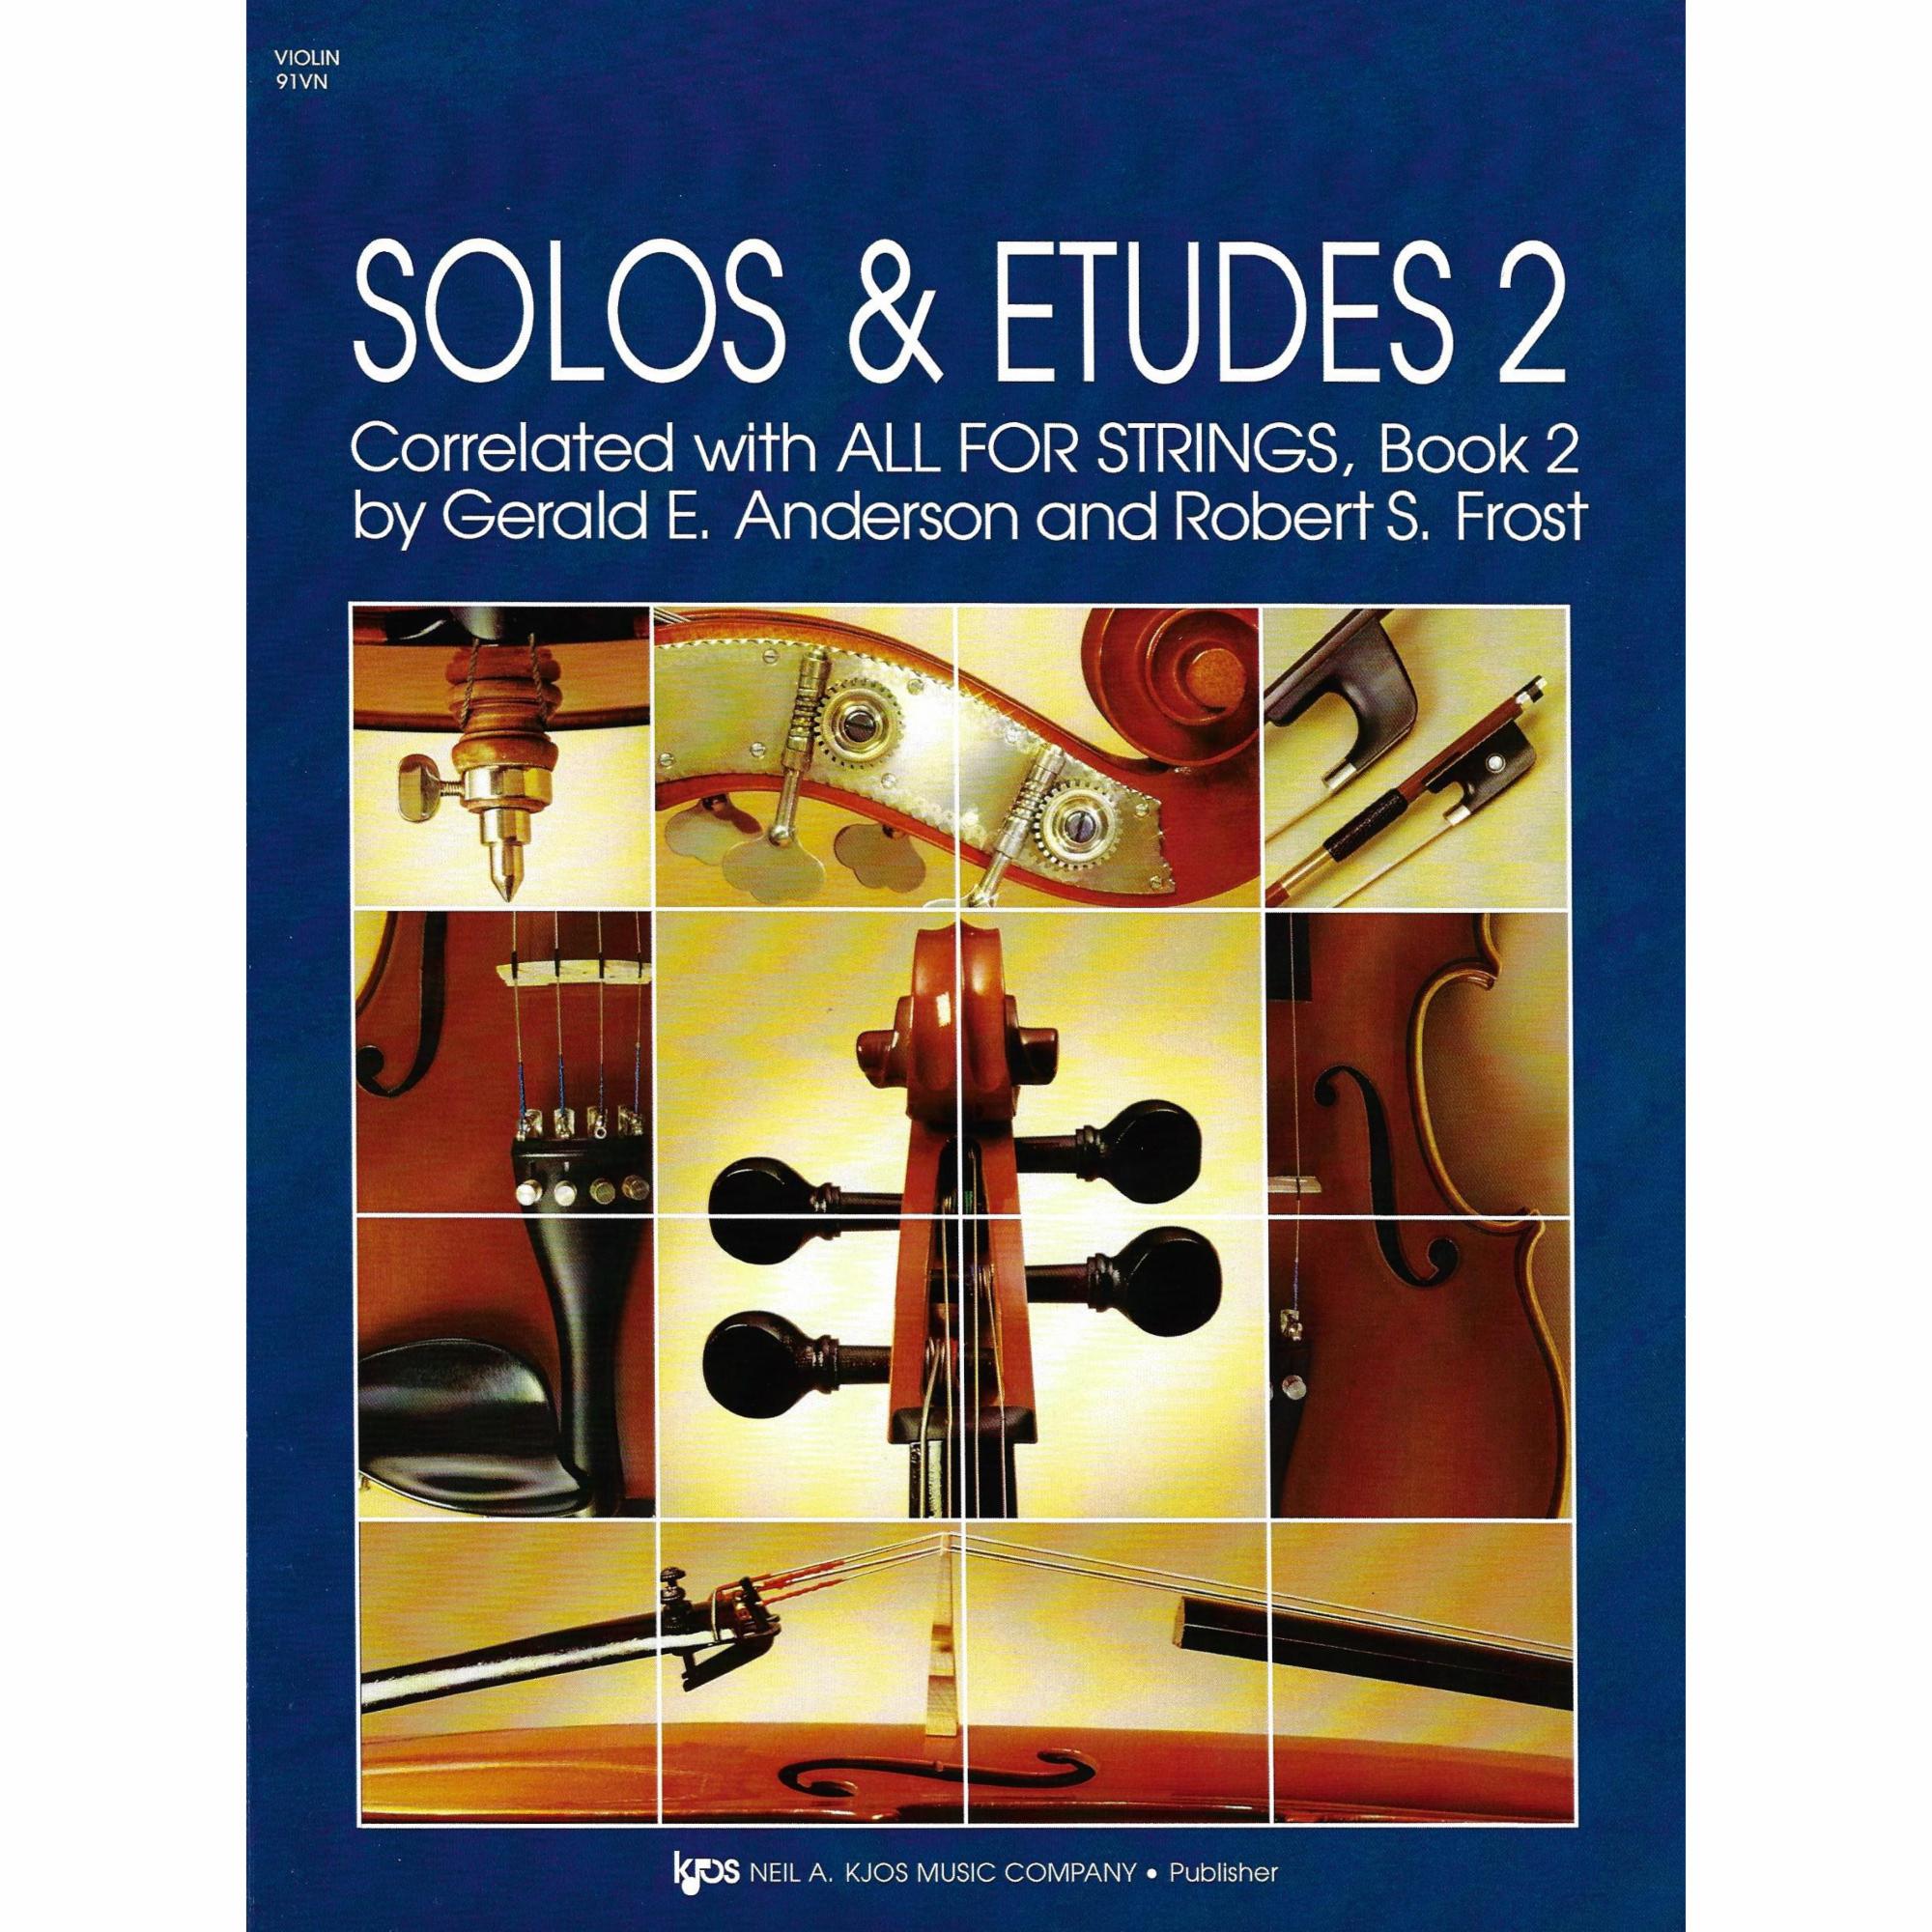 All for Strings: Solos & Etudes, Book 2